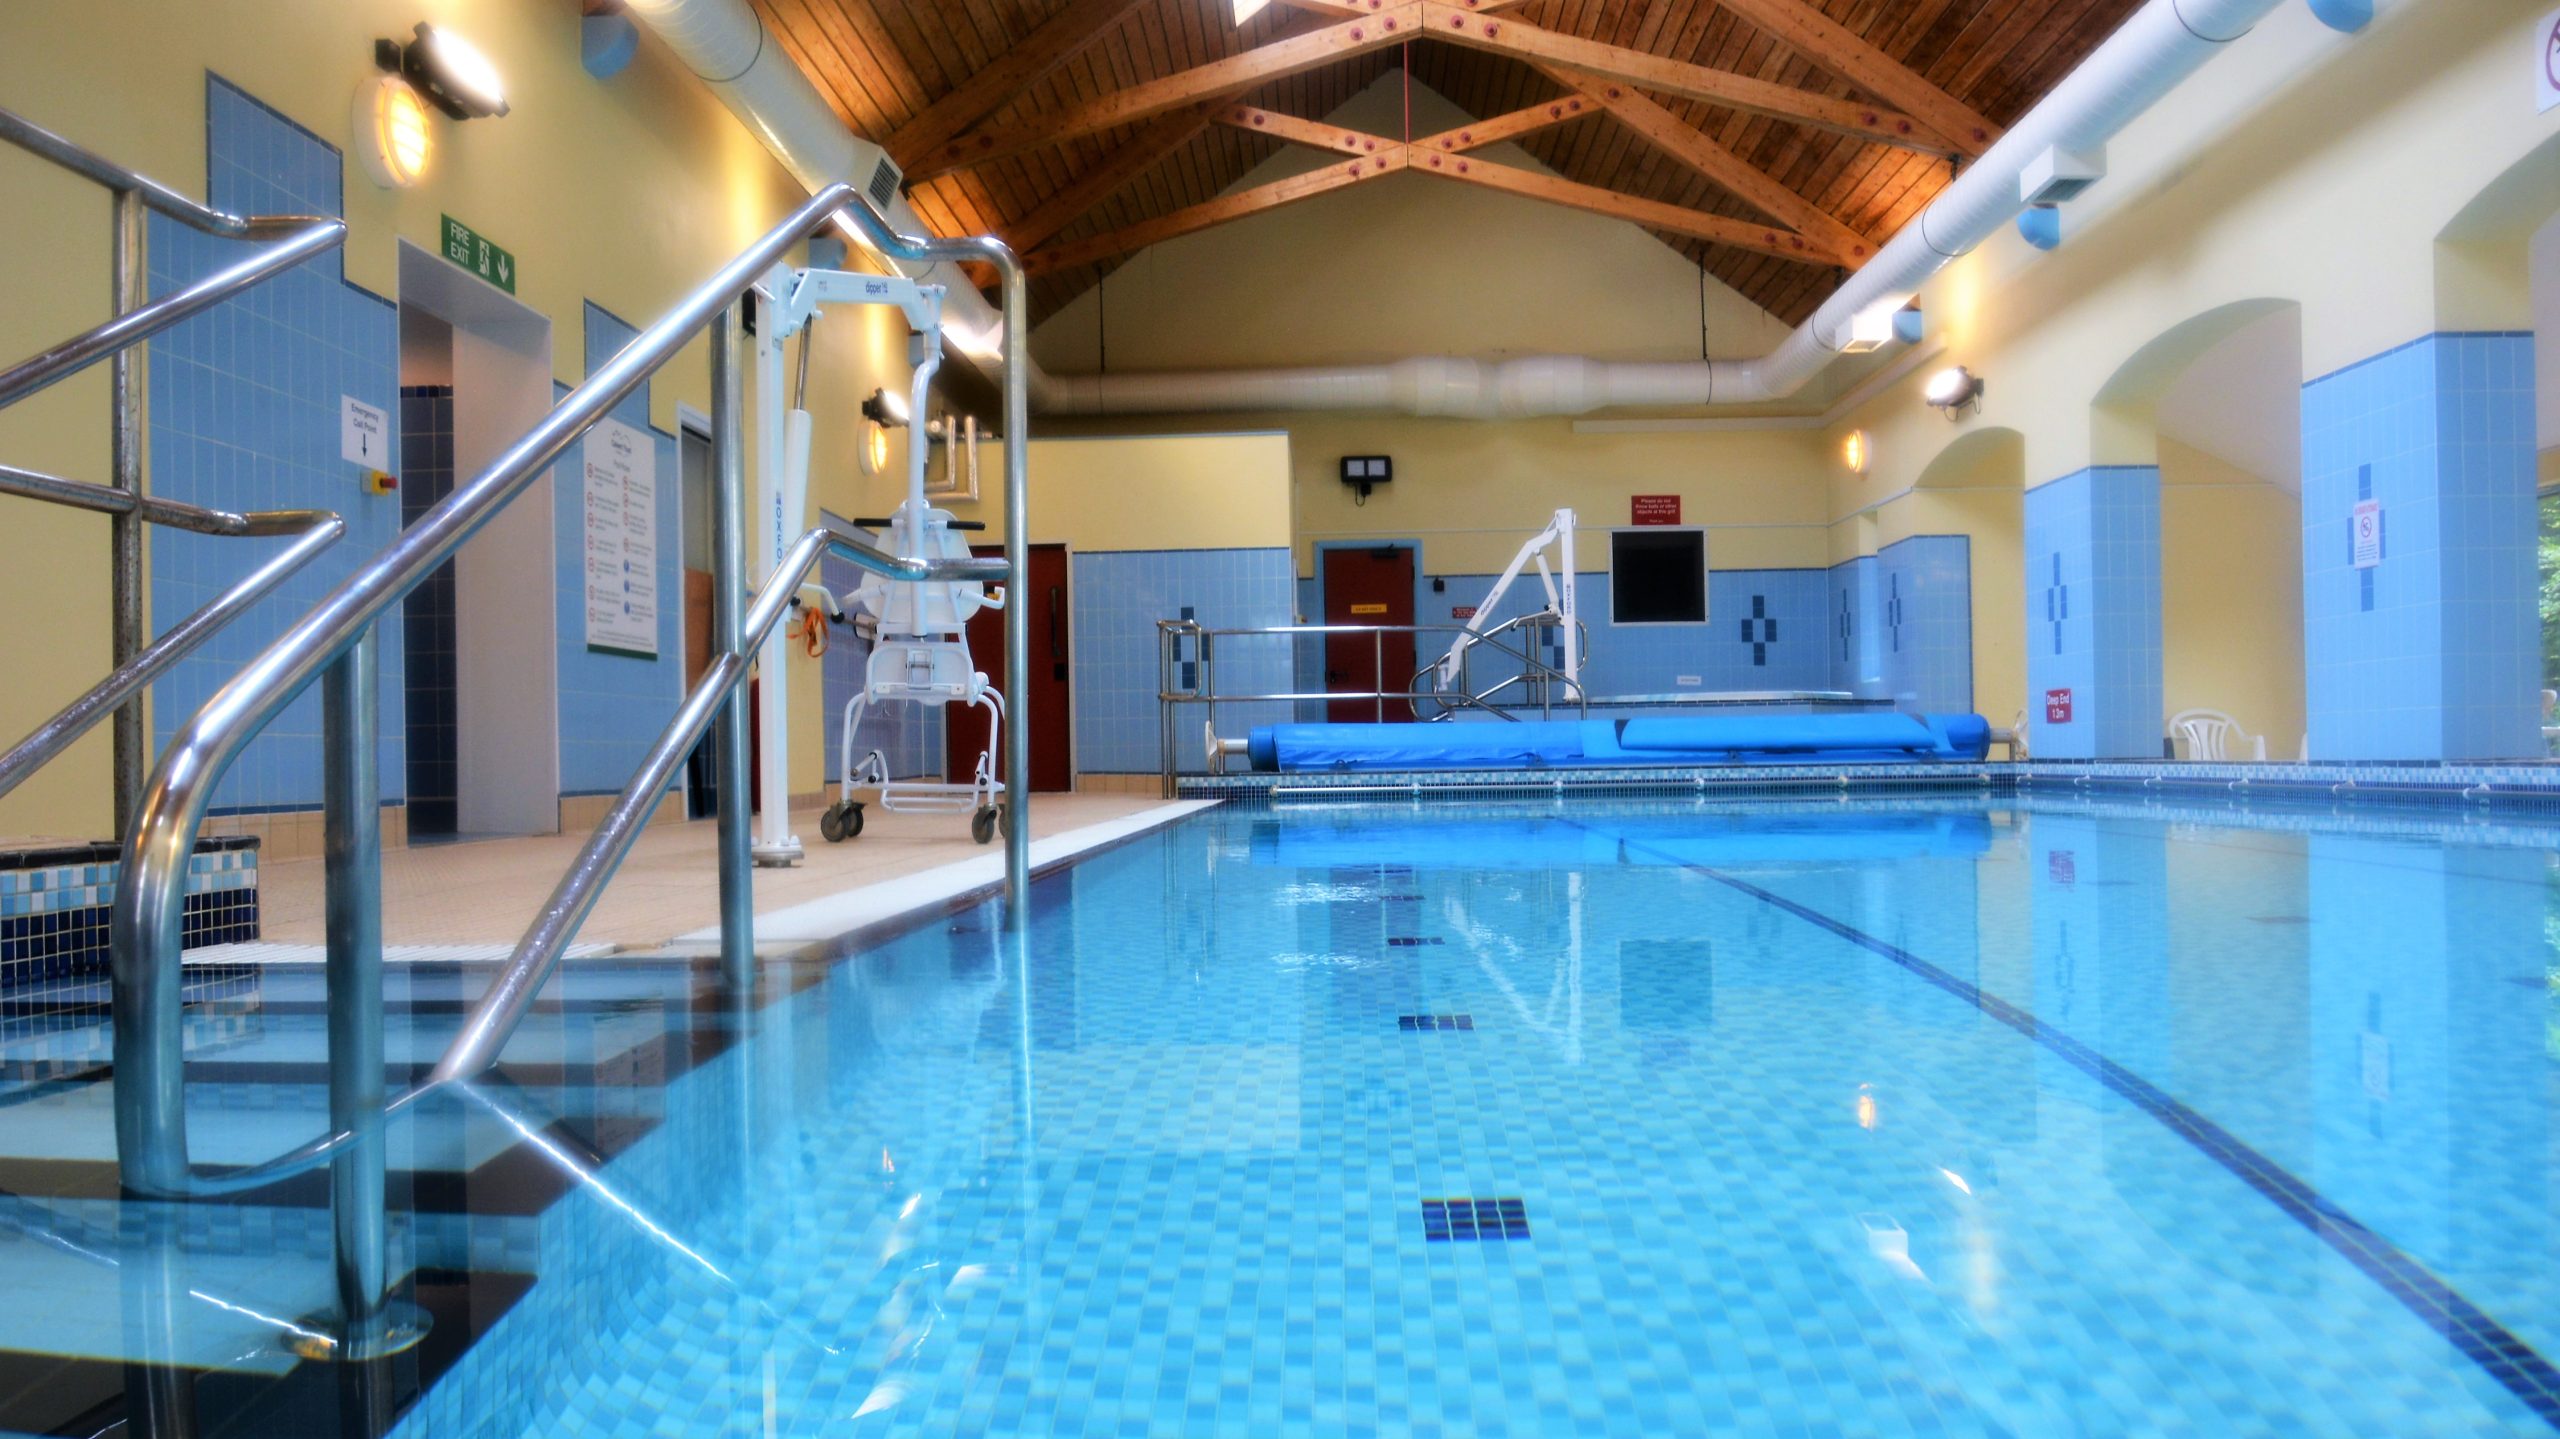 An empty indoor swimming pool with blue tiling and yellow walls, with a wooden paneled ceiling and wood beams. There are silver railings in the foreground with steps that go into the pool and a hoist in the background.